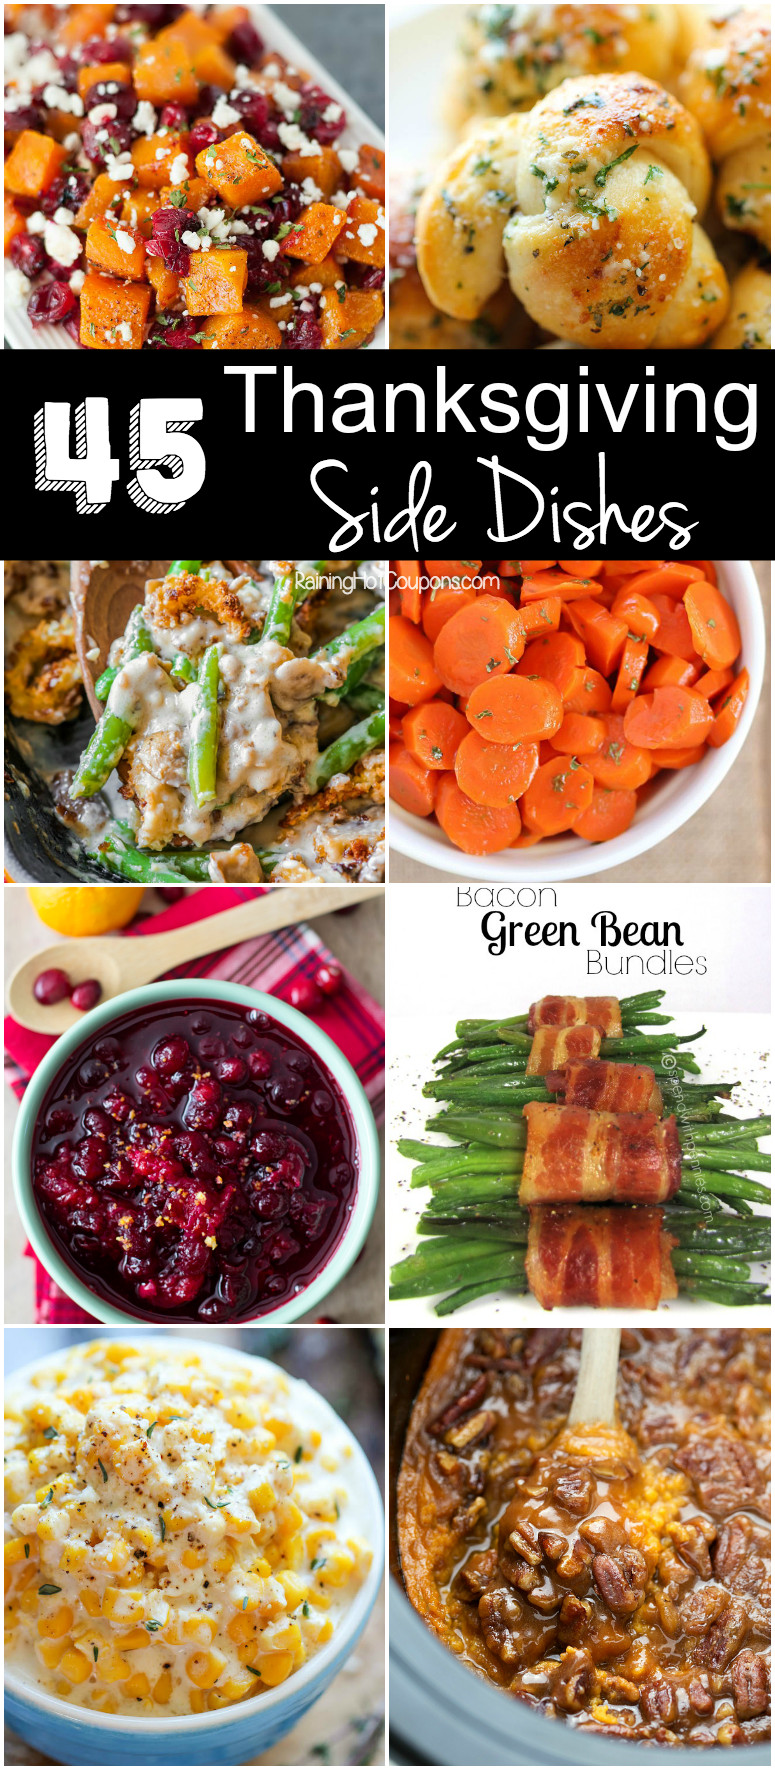 Thanksgiving Side Dishes Recipes
 45 Thanksgiving Side Dishes